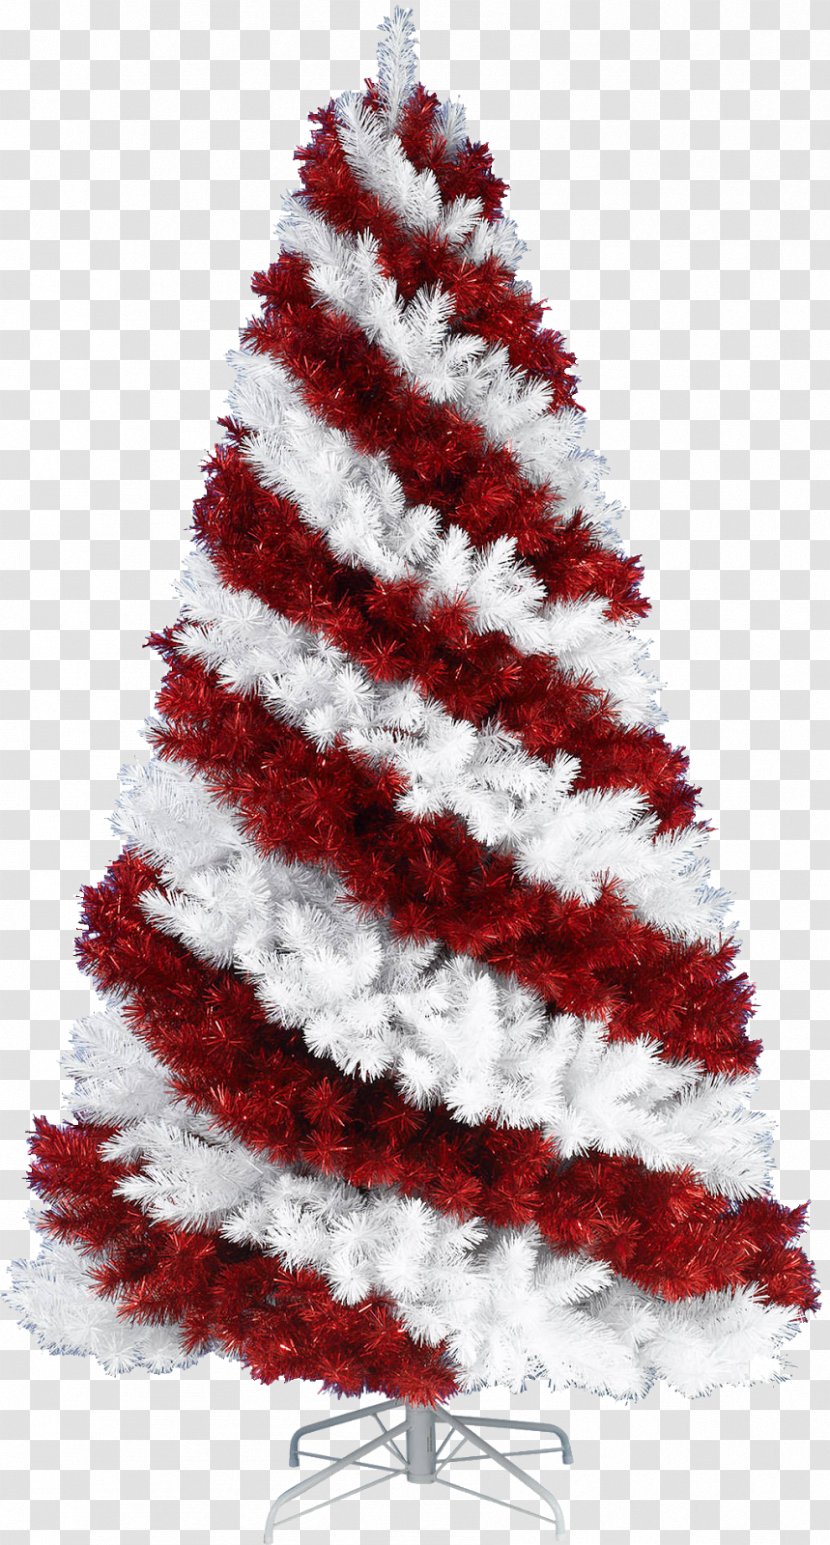 Artificial Christmas Tree Pre-lit - And Holiday Season Transparent PNG